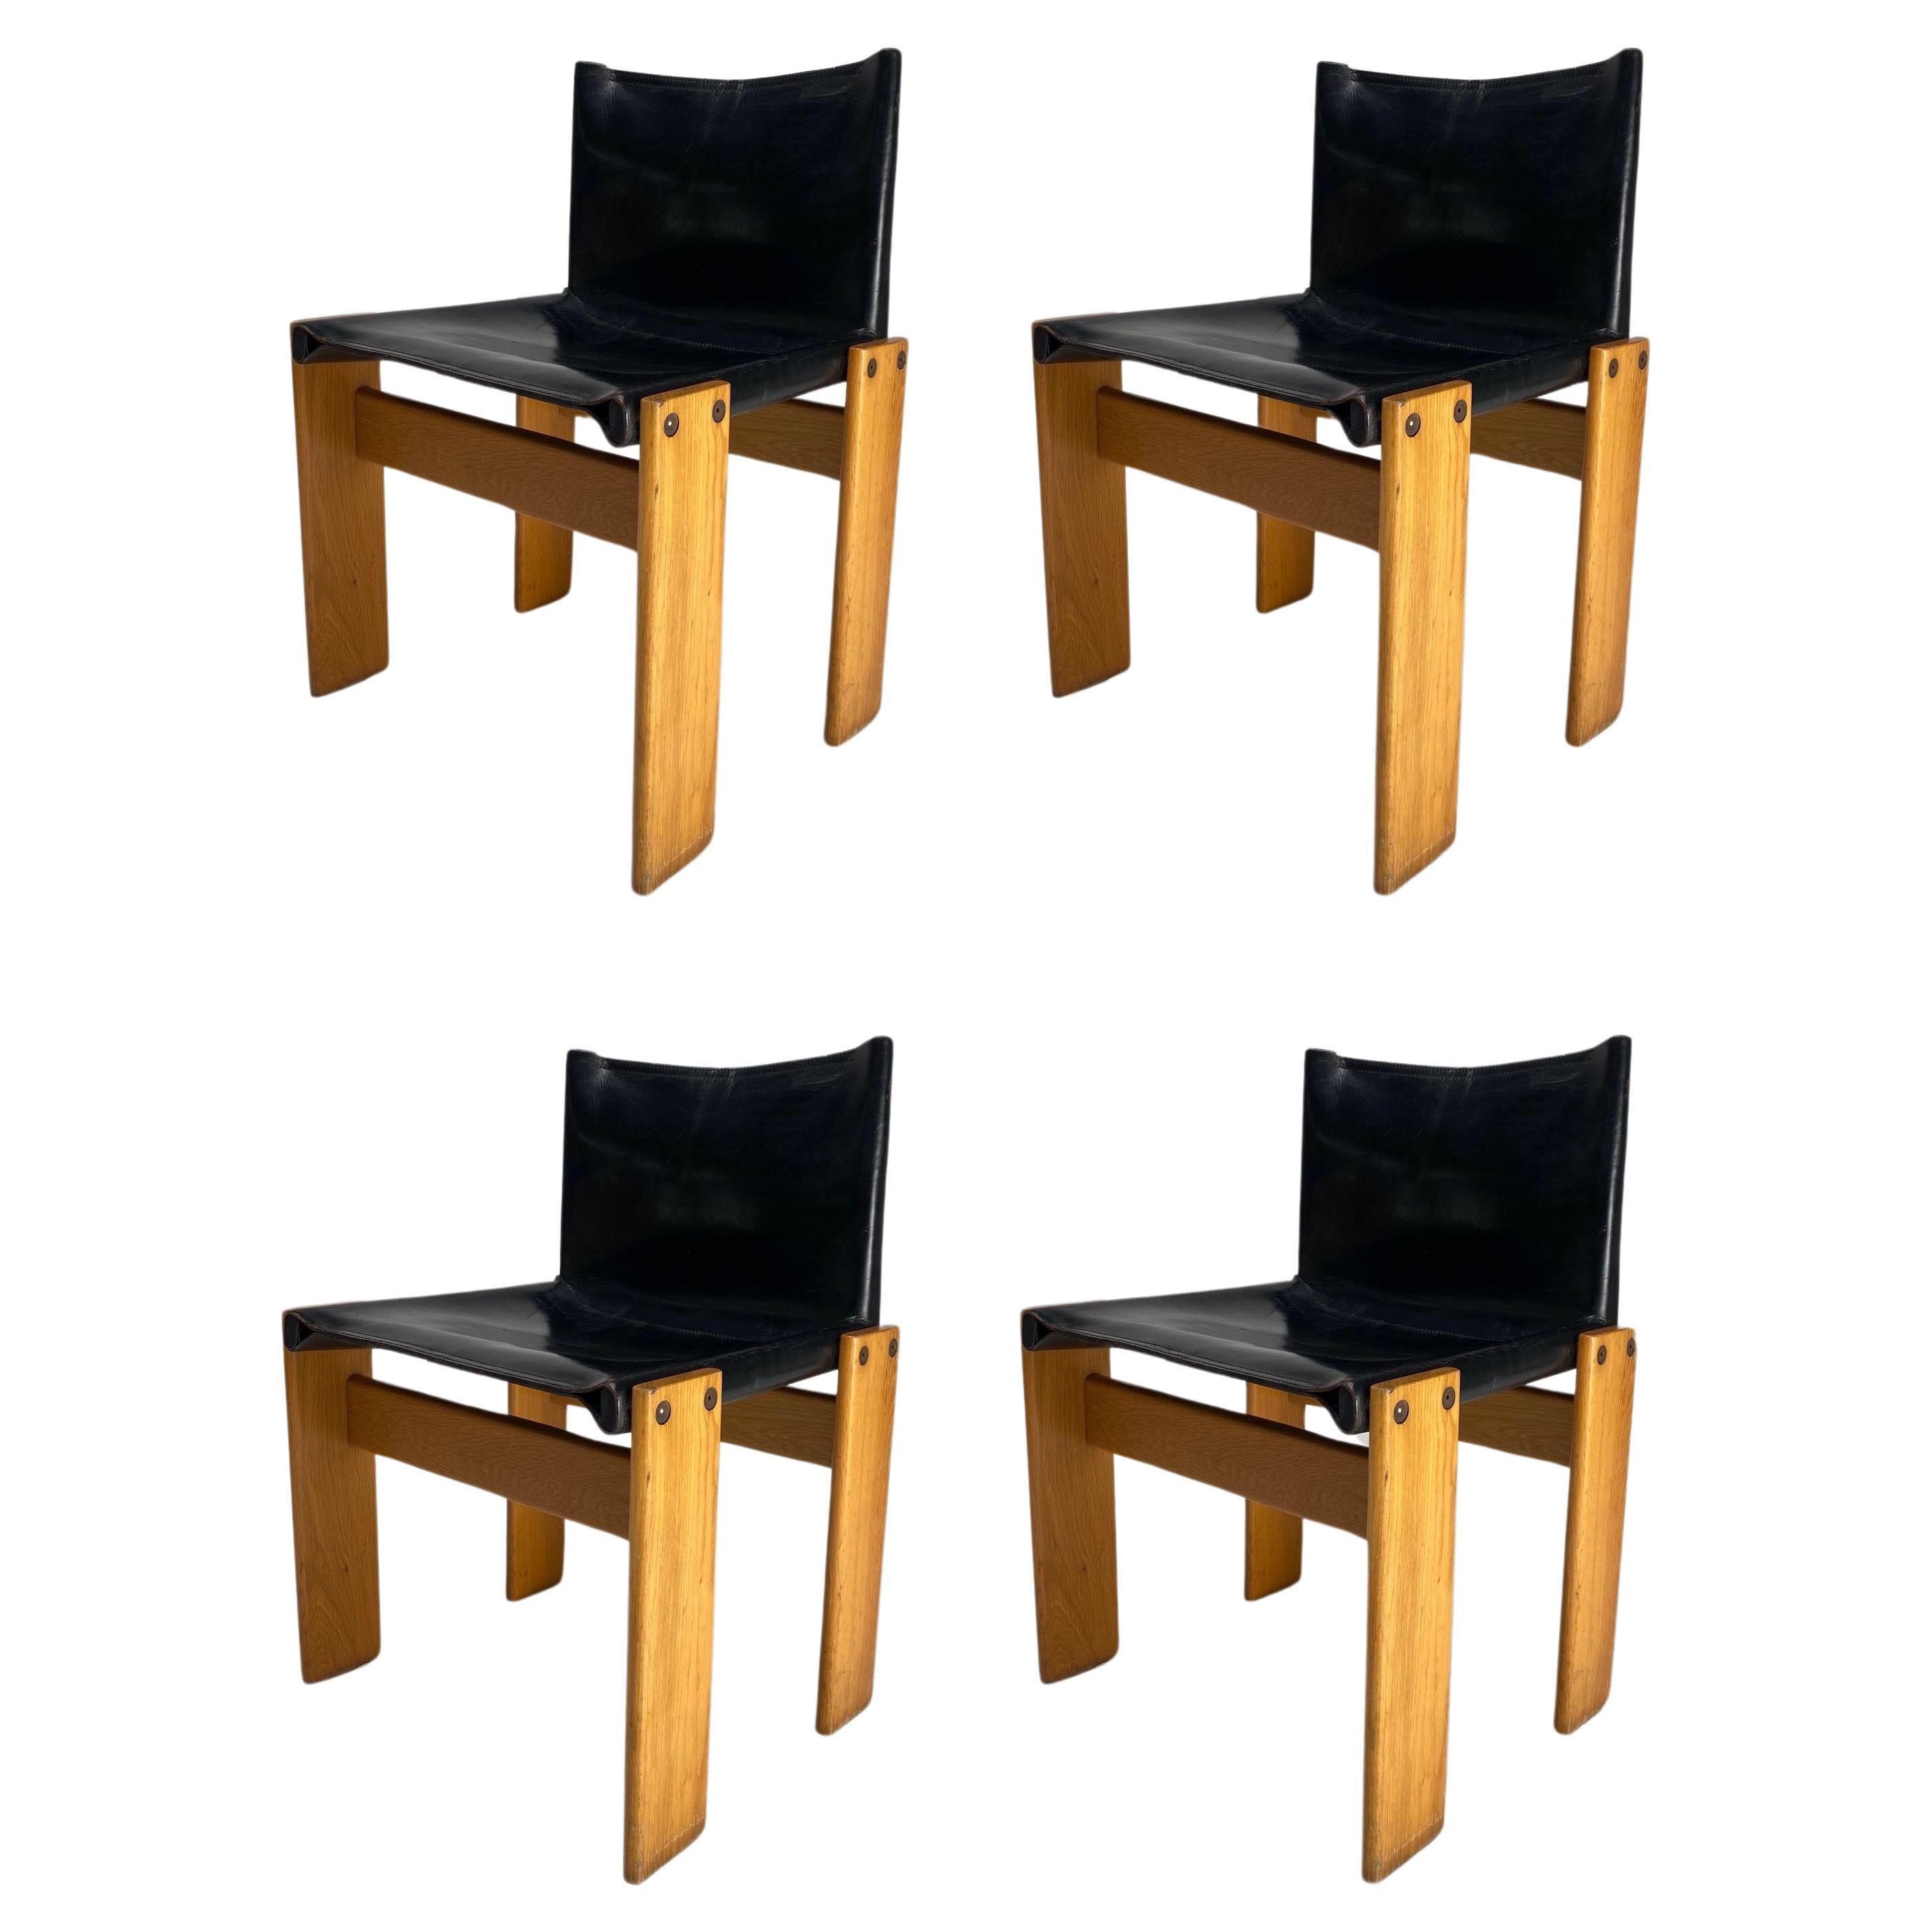 Set of 4 'Monk' Chairs by Afra & Tobia Scarpa for Molteni, Italy 1974 For Sale